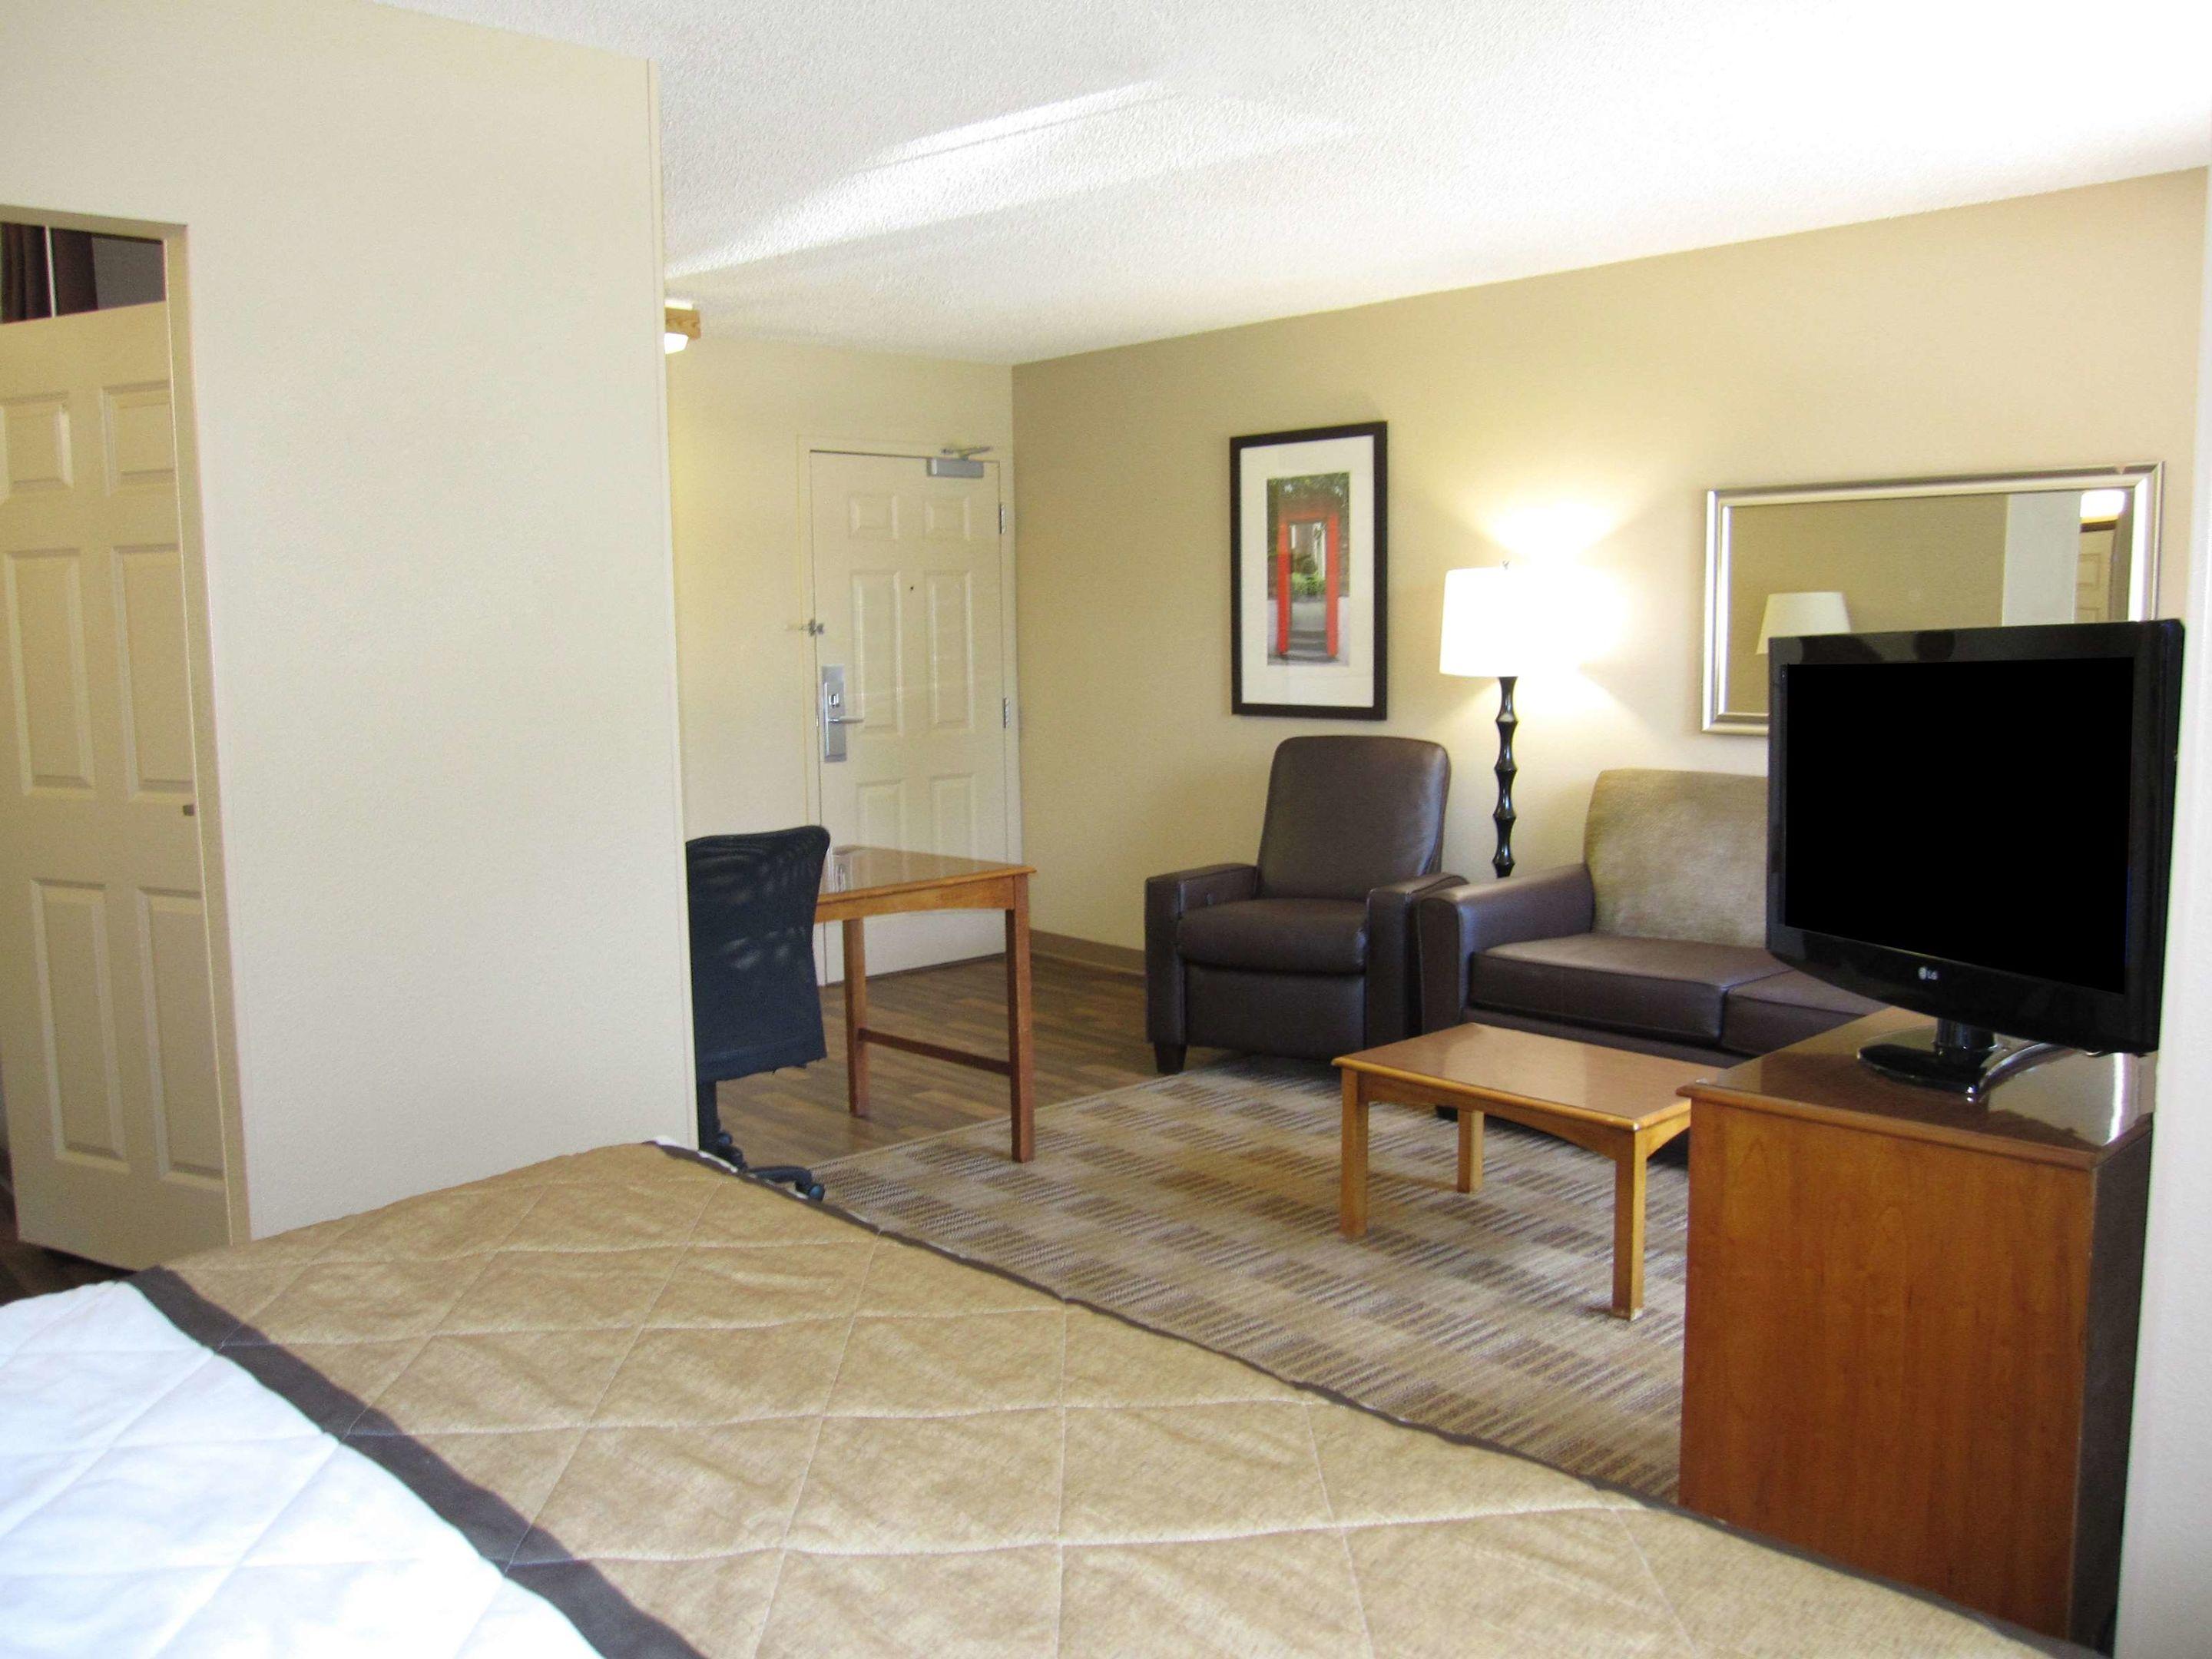 Extended Stay America - Chicago - O'Hare - Allstate Arena